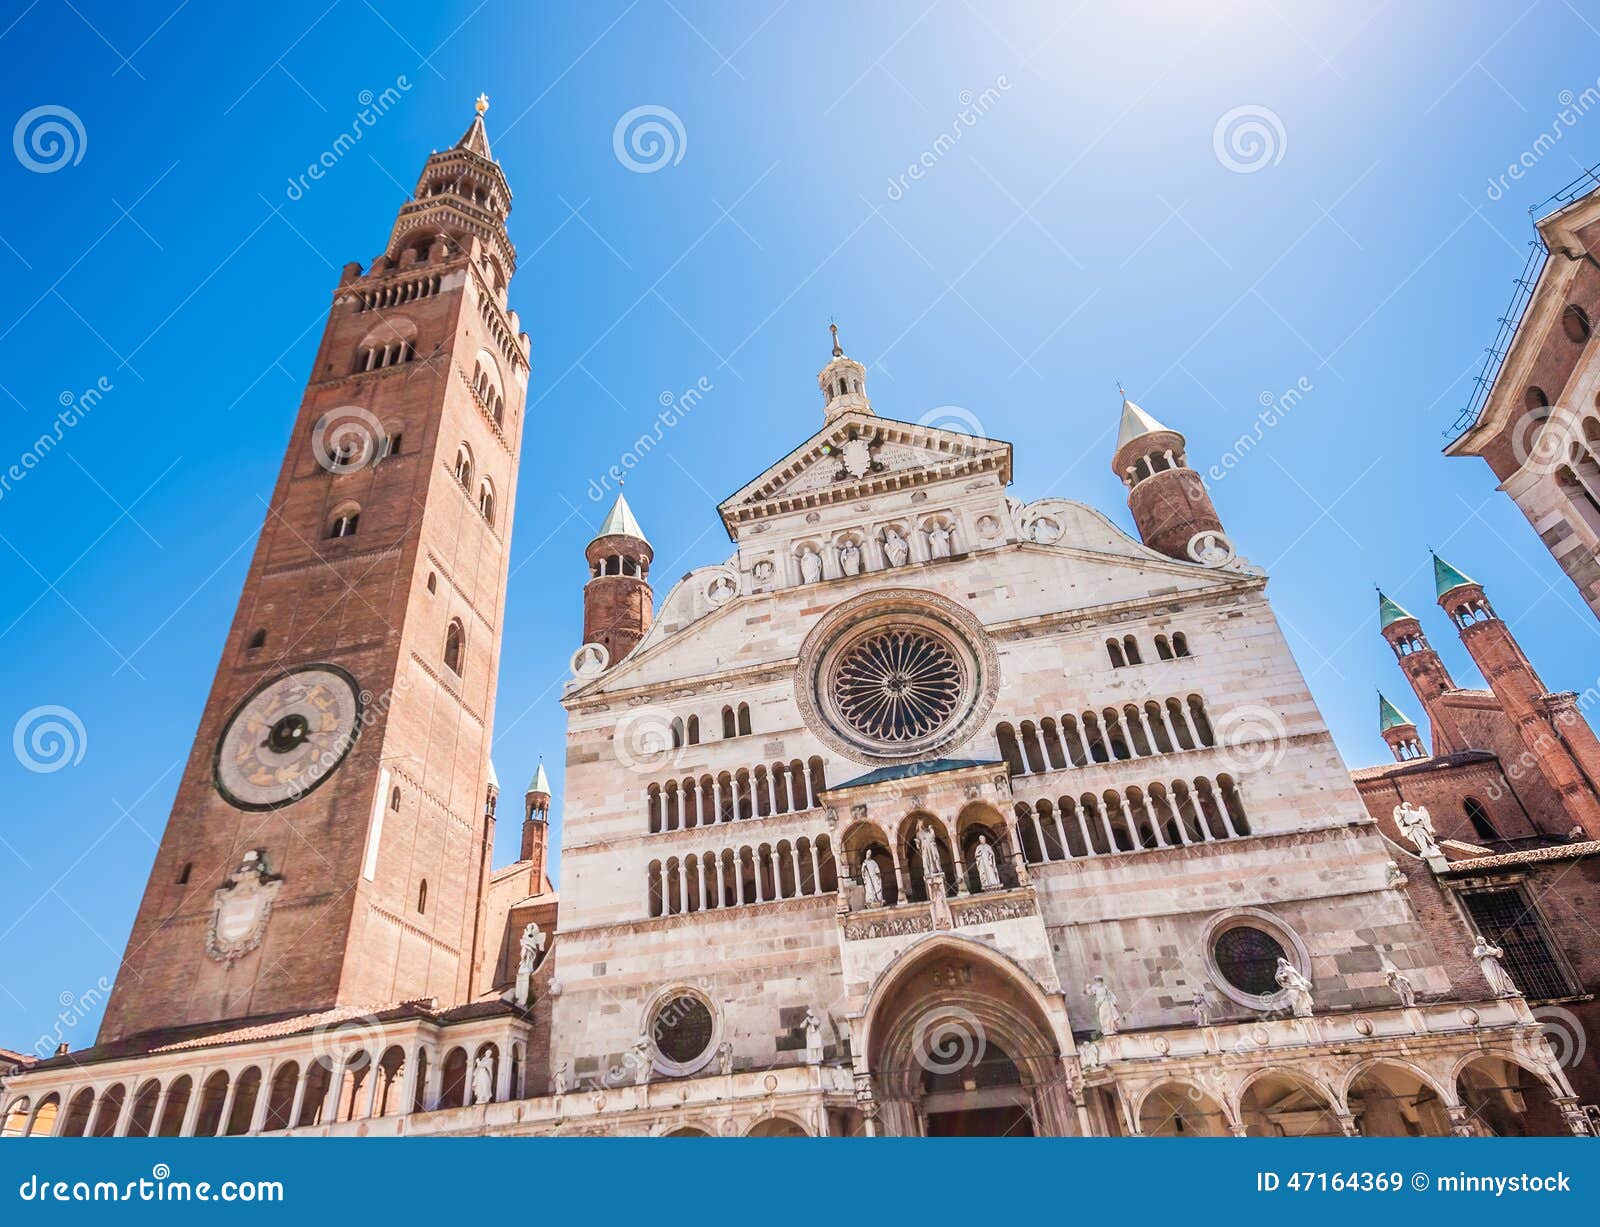 cathedral of cremona, lombardy, italy